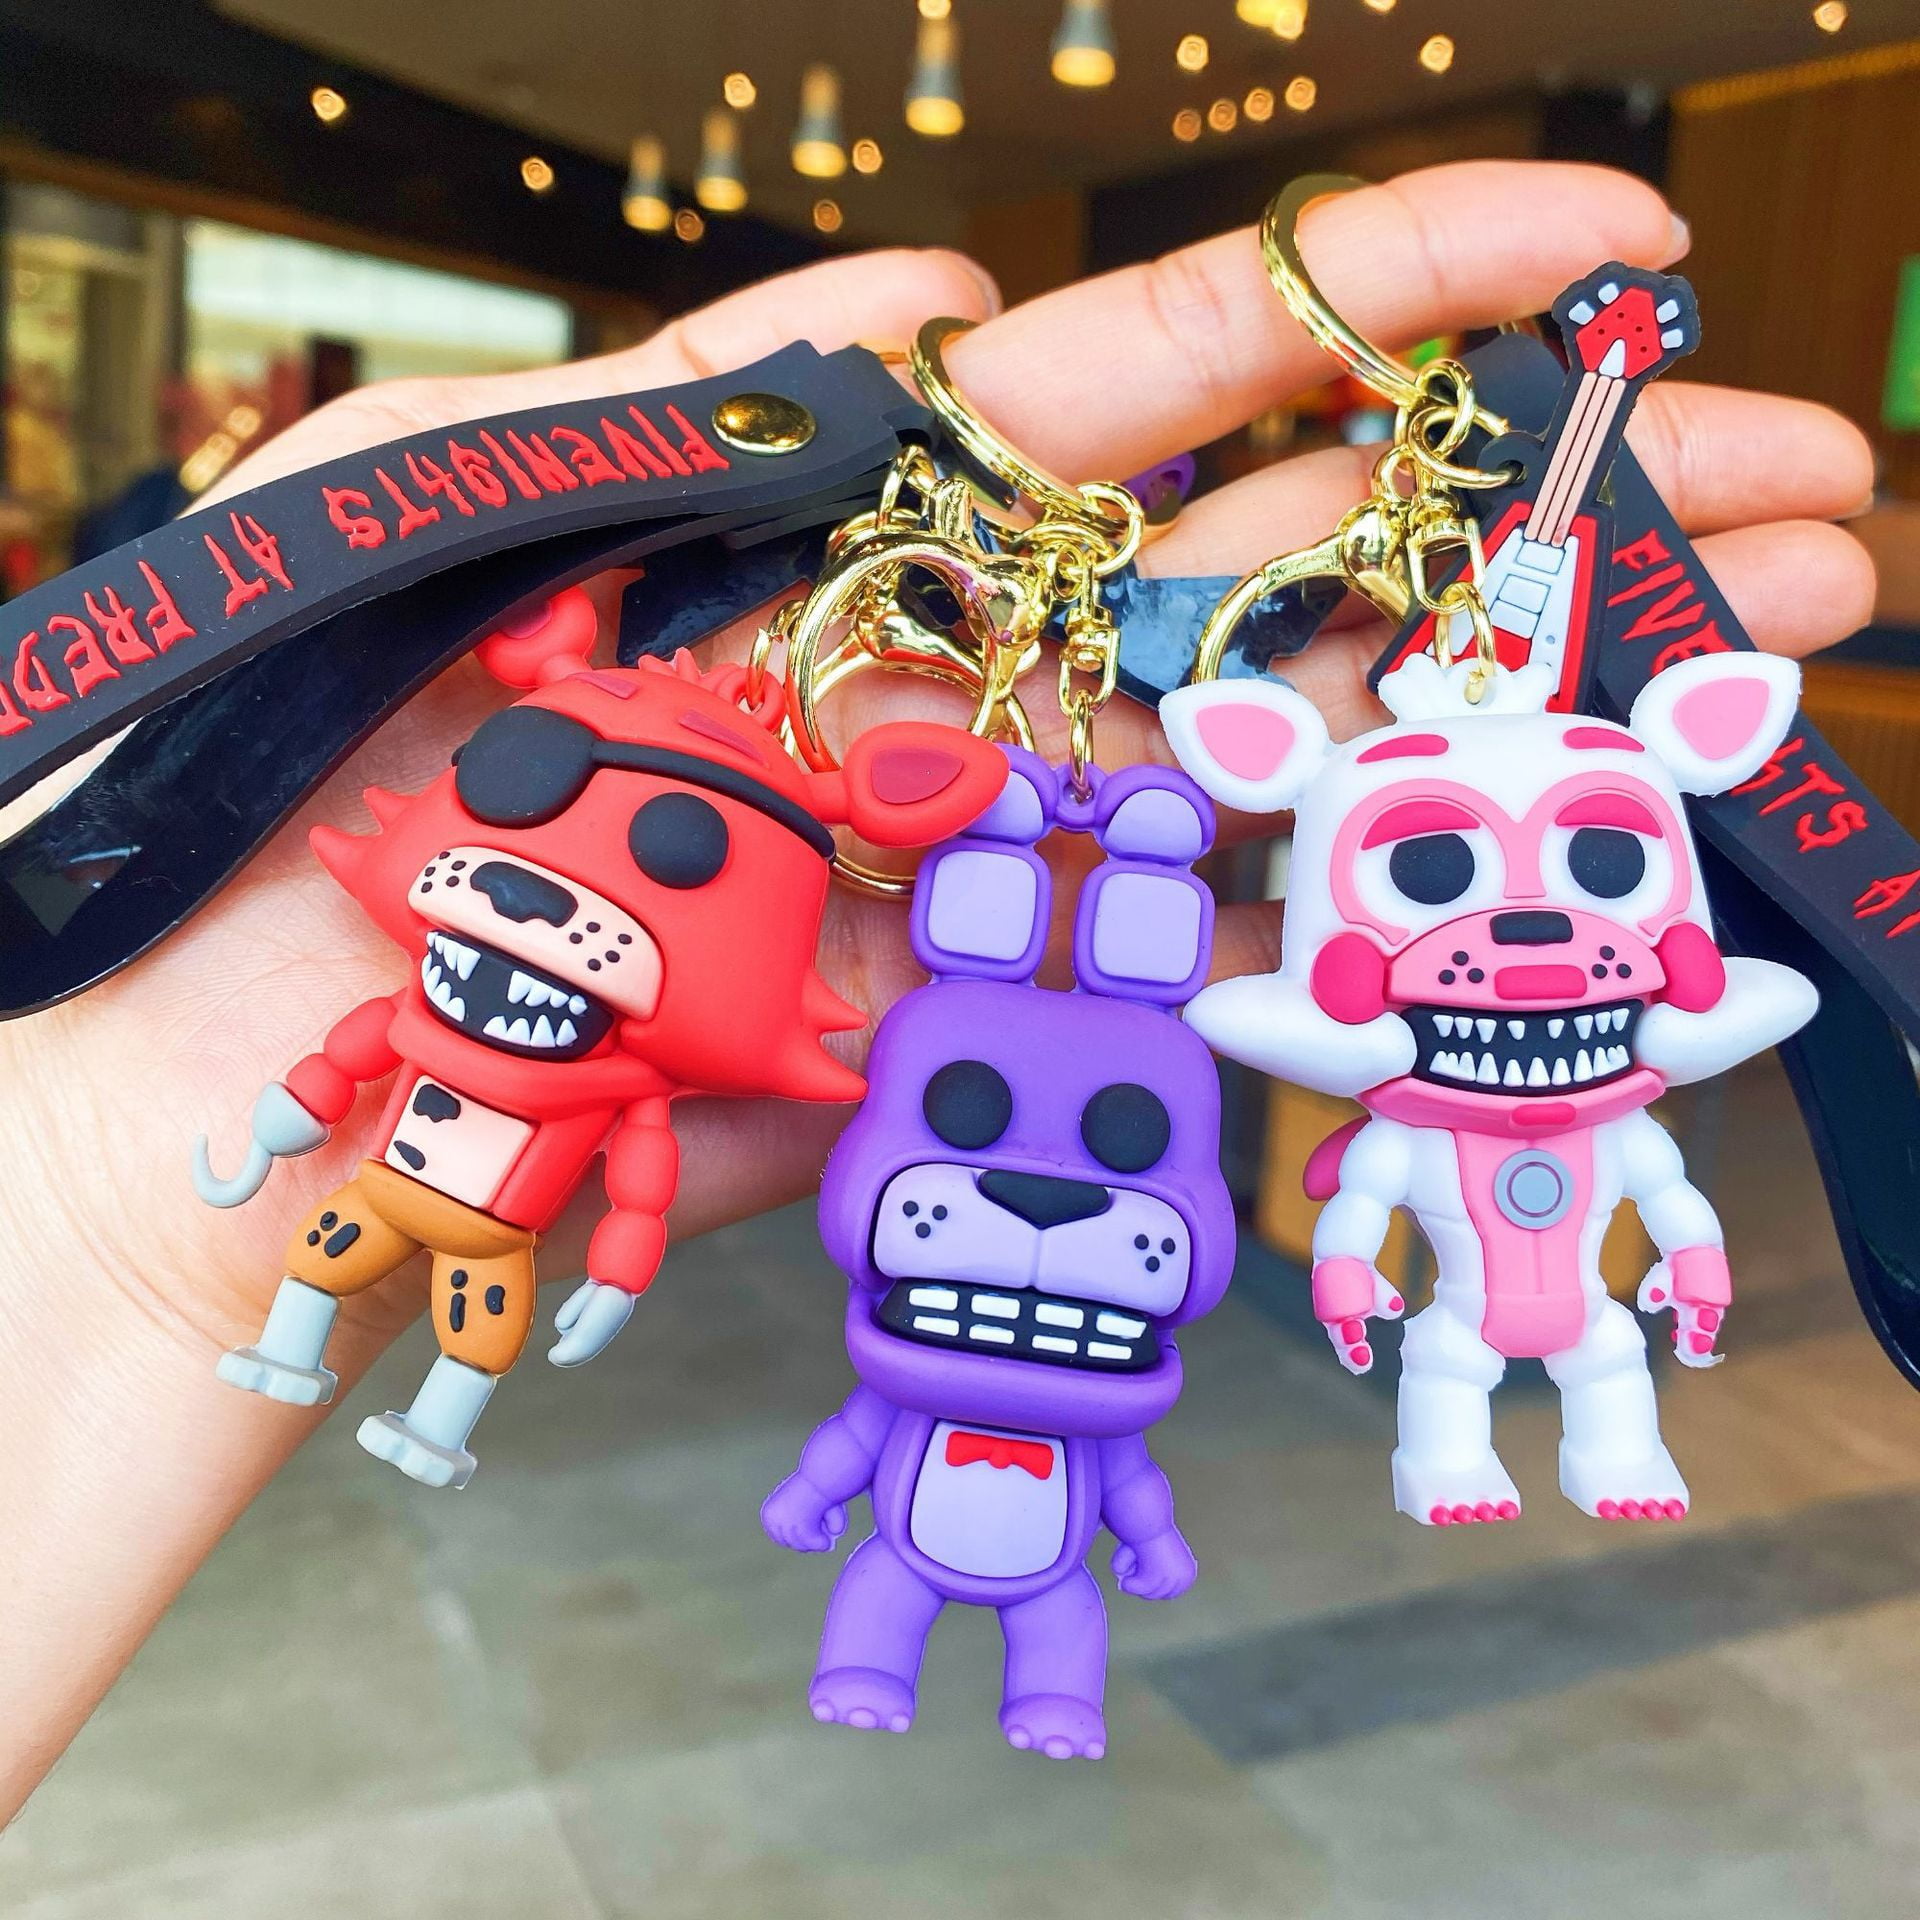 5pcs FNAF Keychain Set - Cute Keychain Horror Game Keychains for Kids  Backpack Key Chain Pendant Friend Gift for Boys Girls and Fans